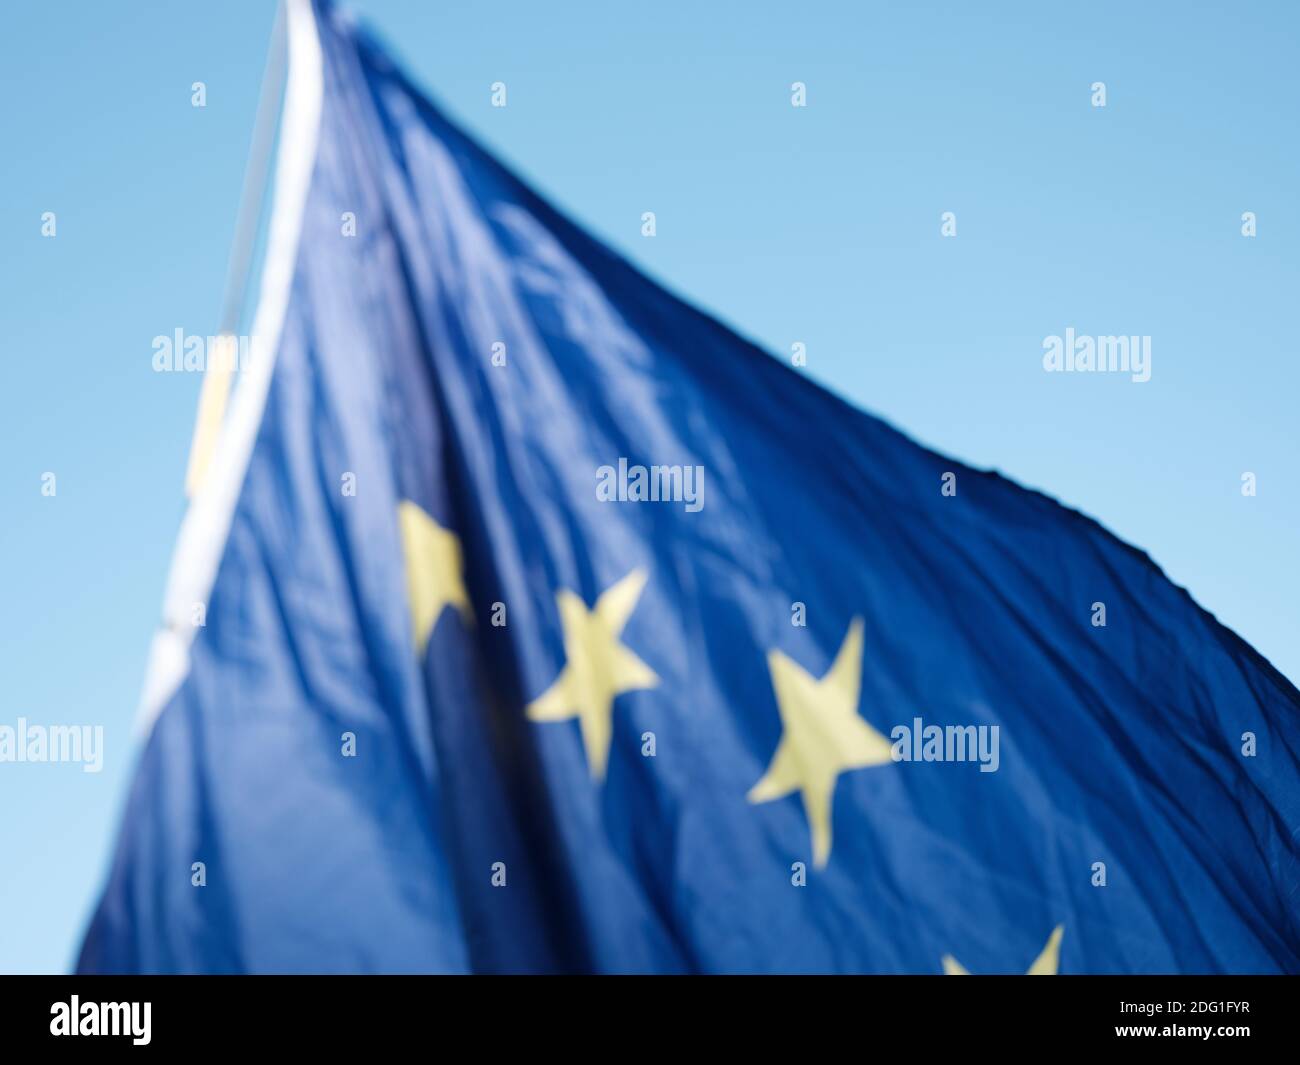 An out-of-focus EU flag outside the gate of the House of Parliament (Palace of Westminster), London, United Kingdom. January 28, 2019. Stock Photo